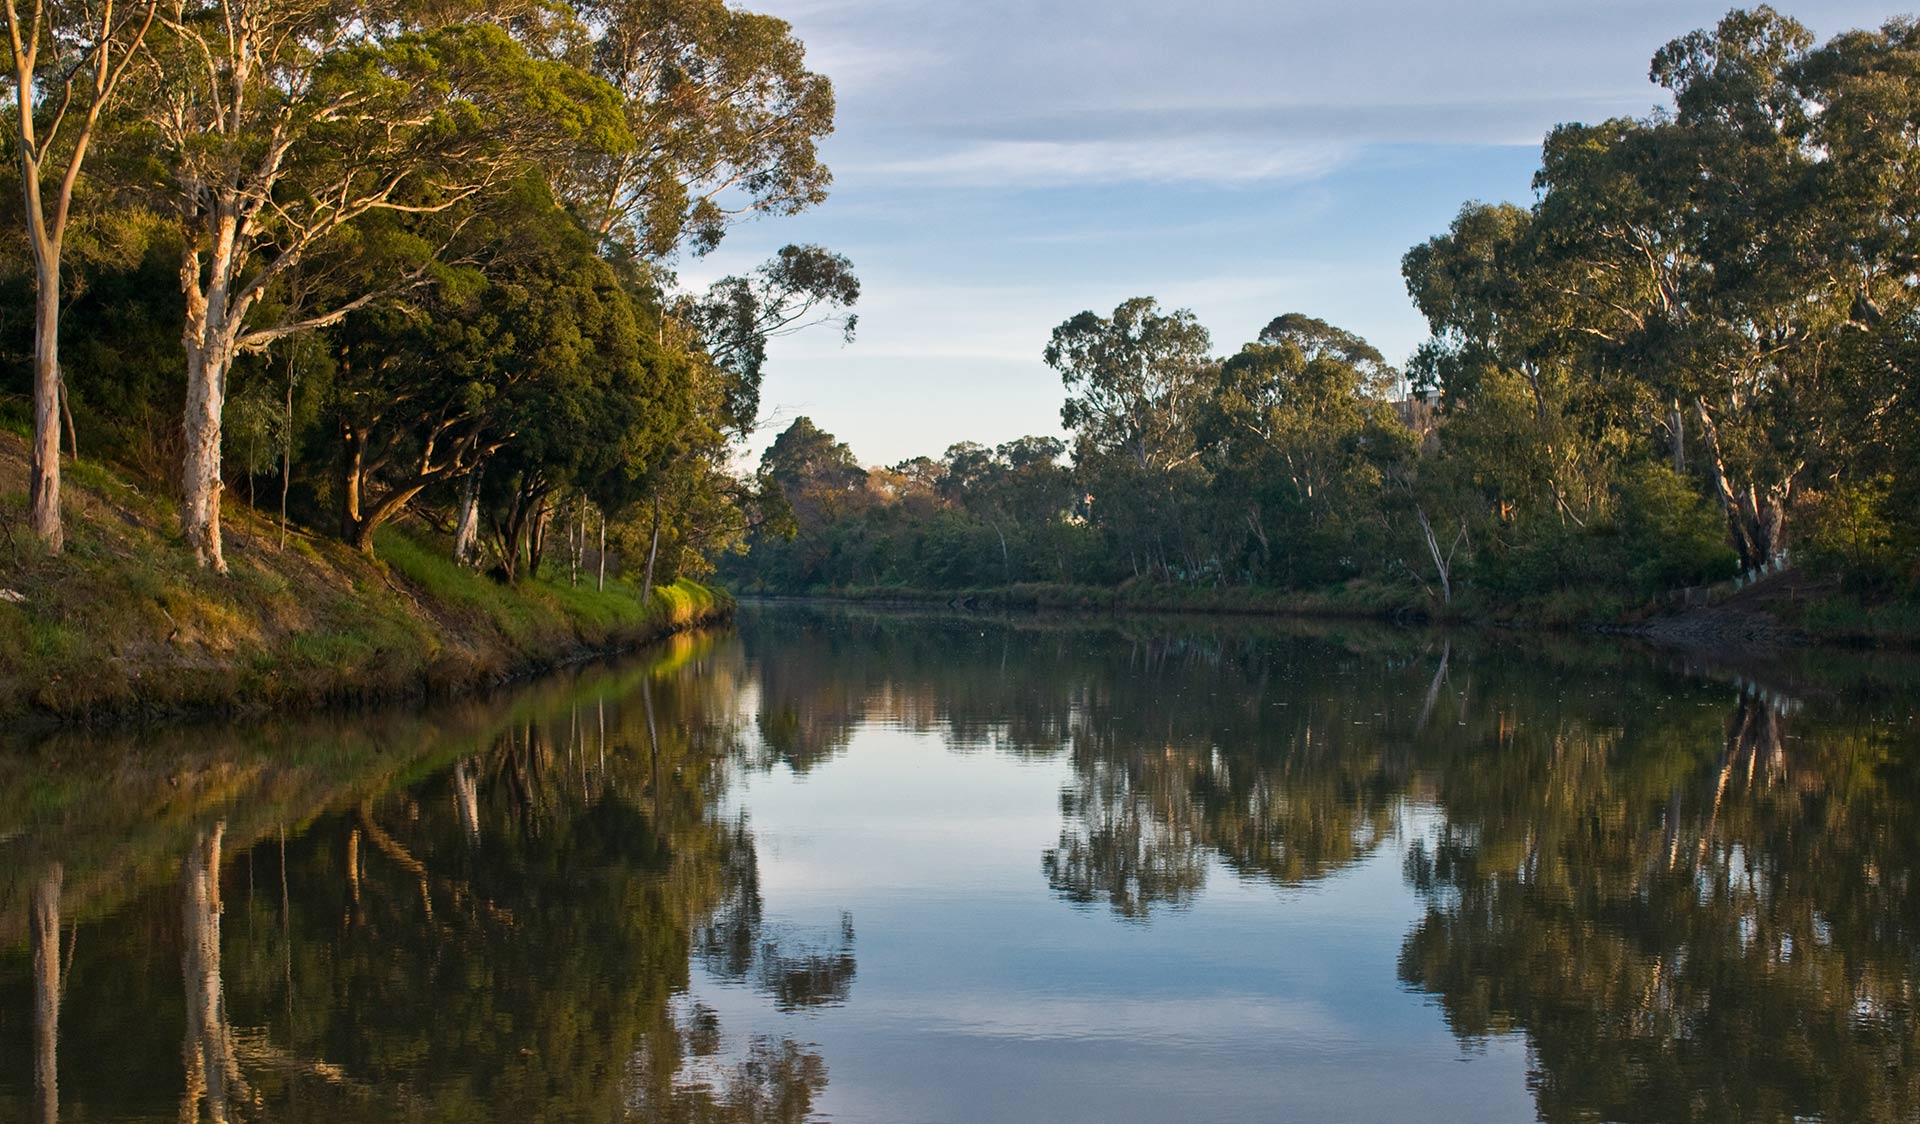 The Yarra River heading upstream from Hawthorn.